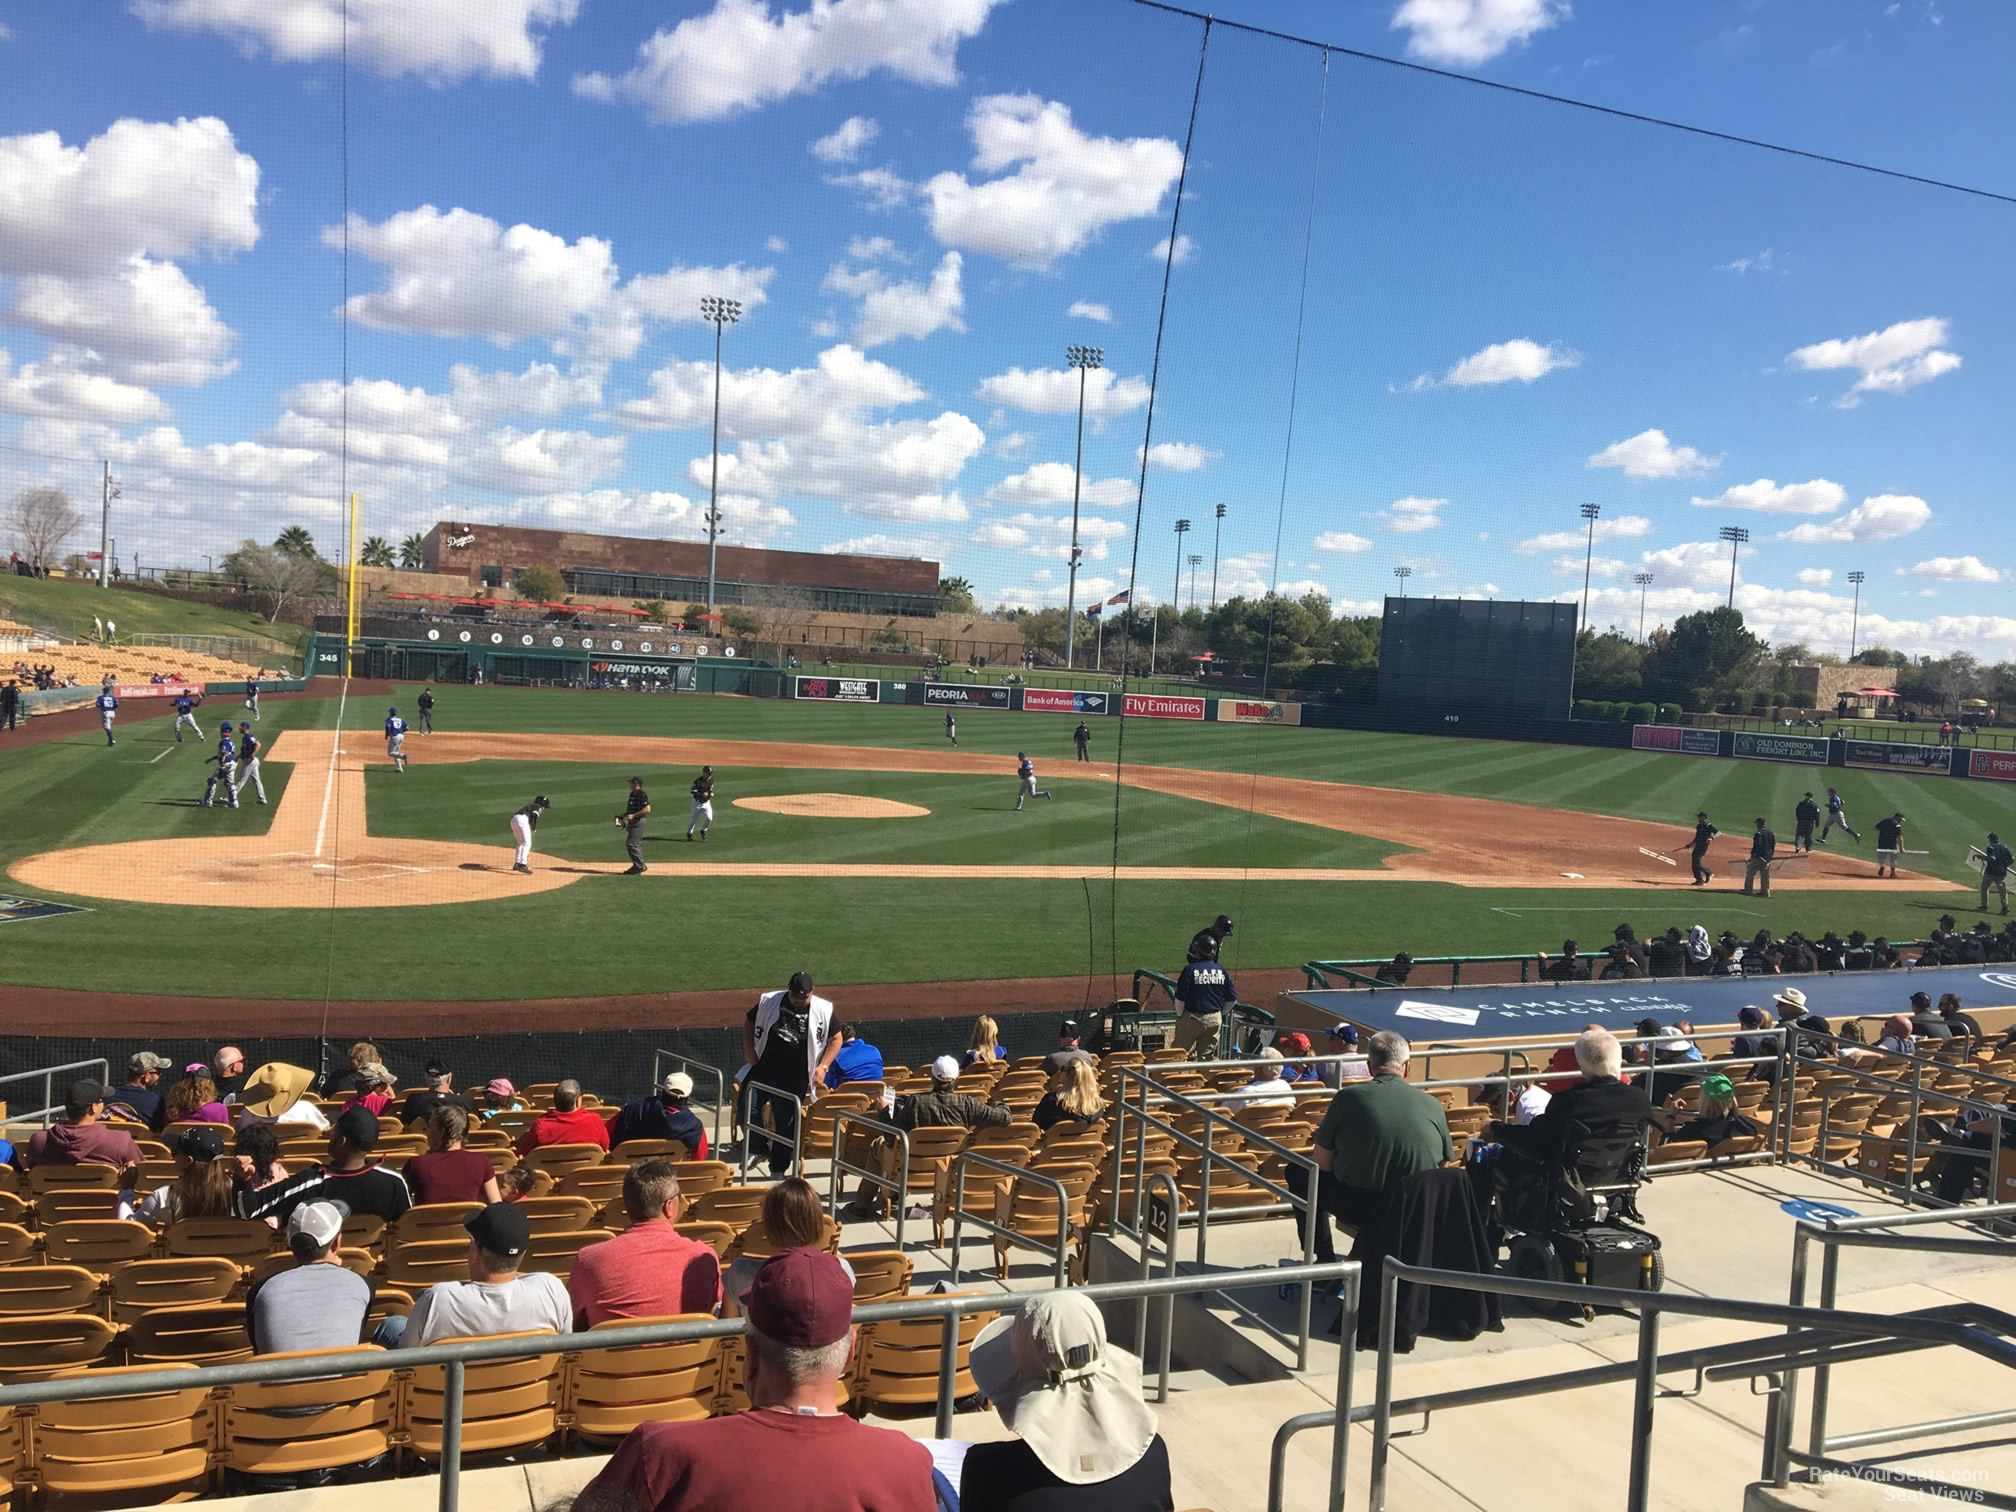 section 112, row 5 seat view  - camelback ranch